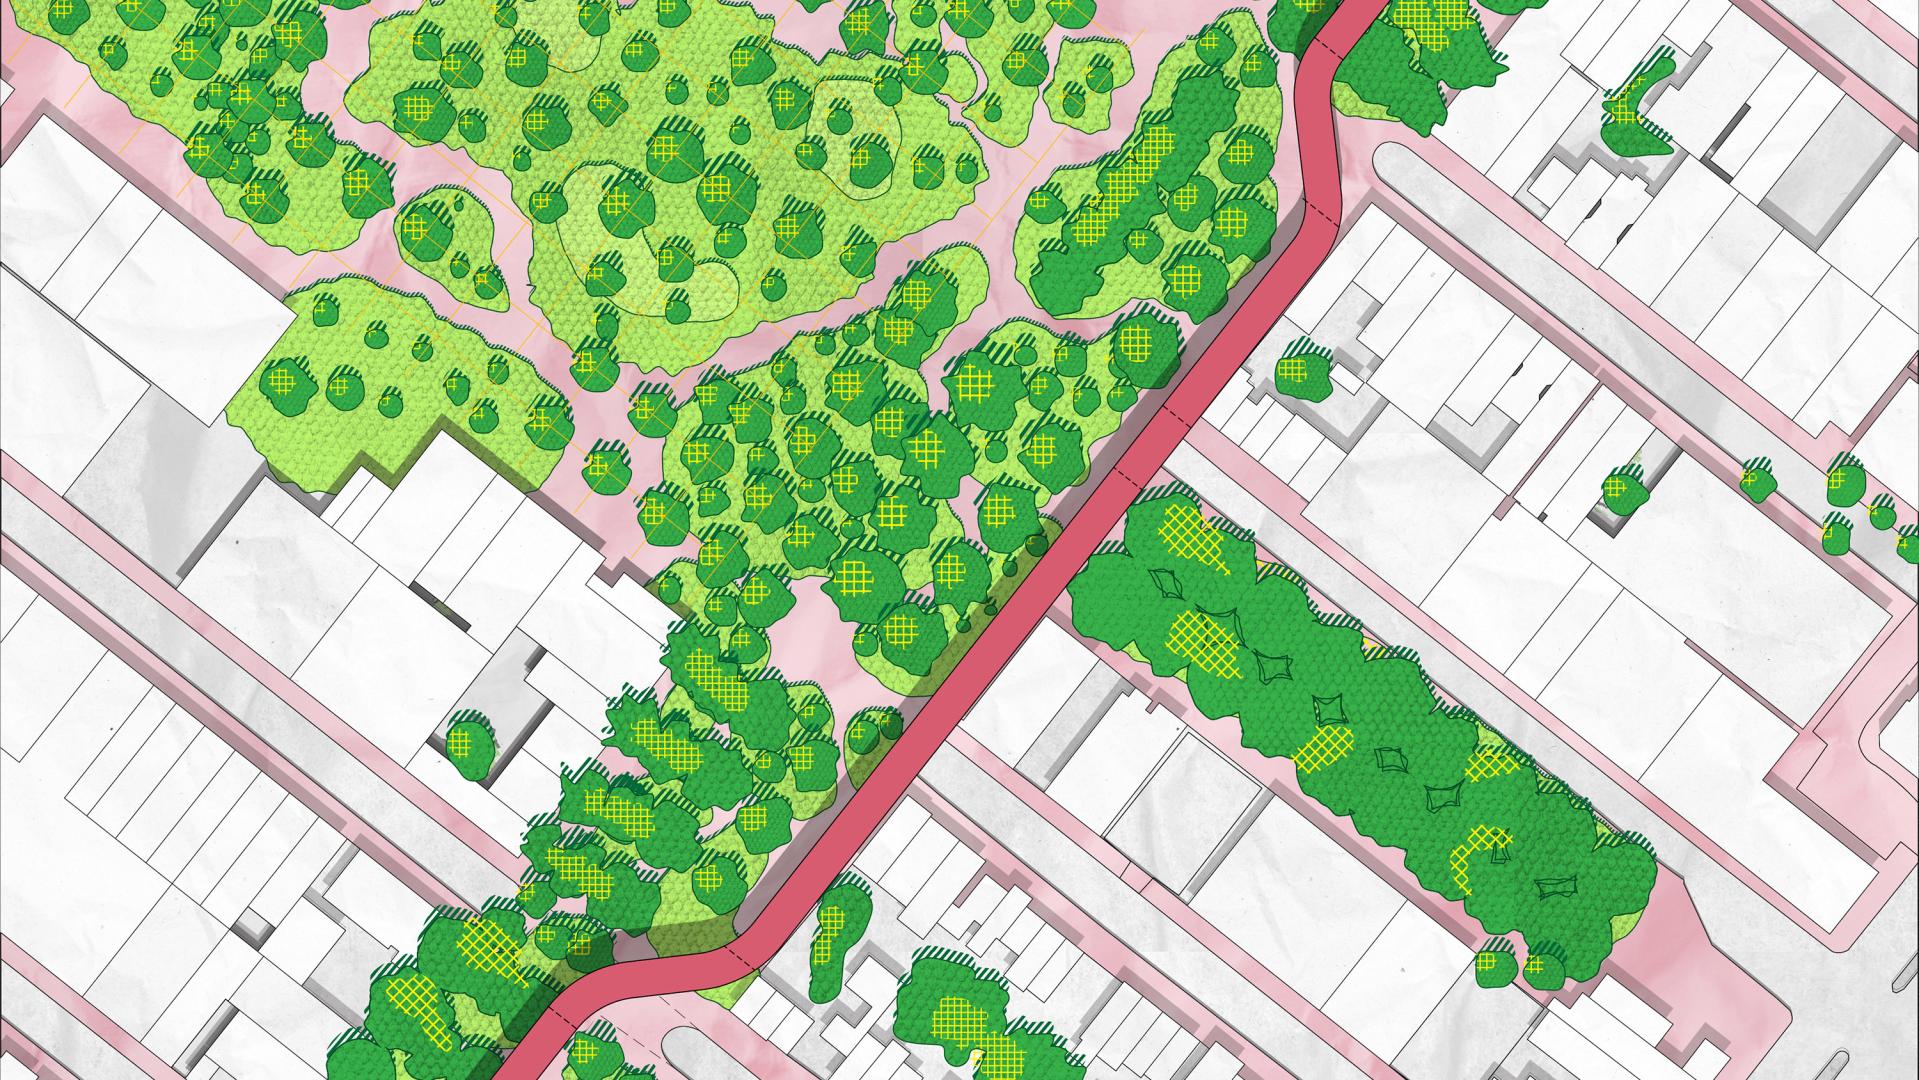 Photo of site plan of a re-wilded BQE centered around a trail between a neighborhood and park.